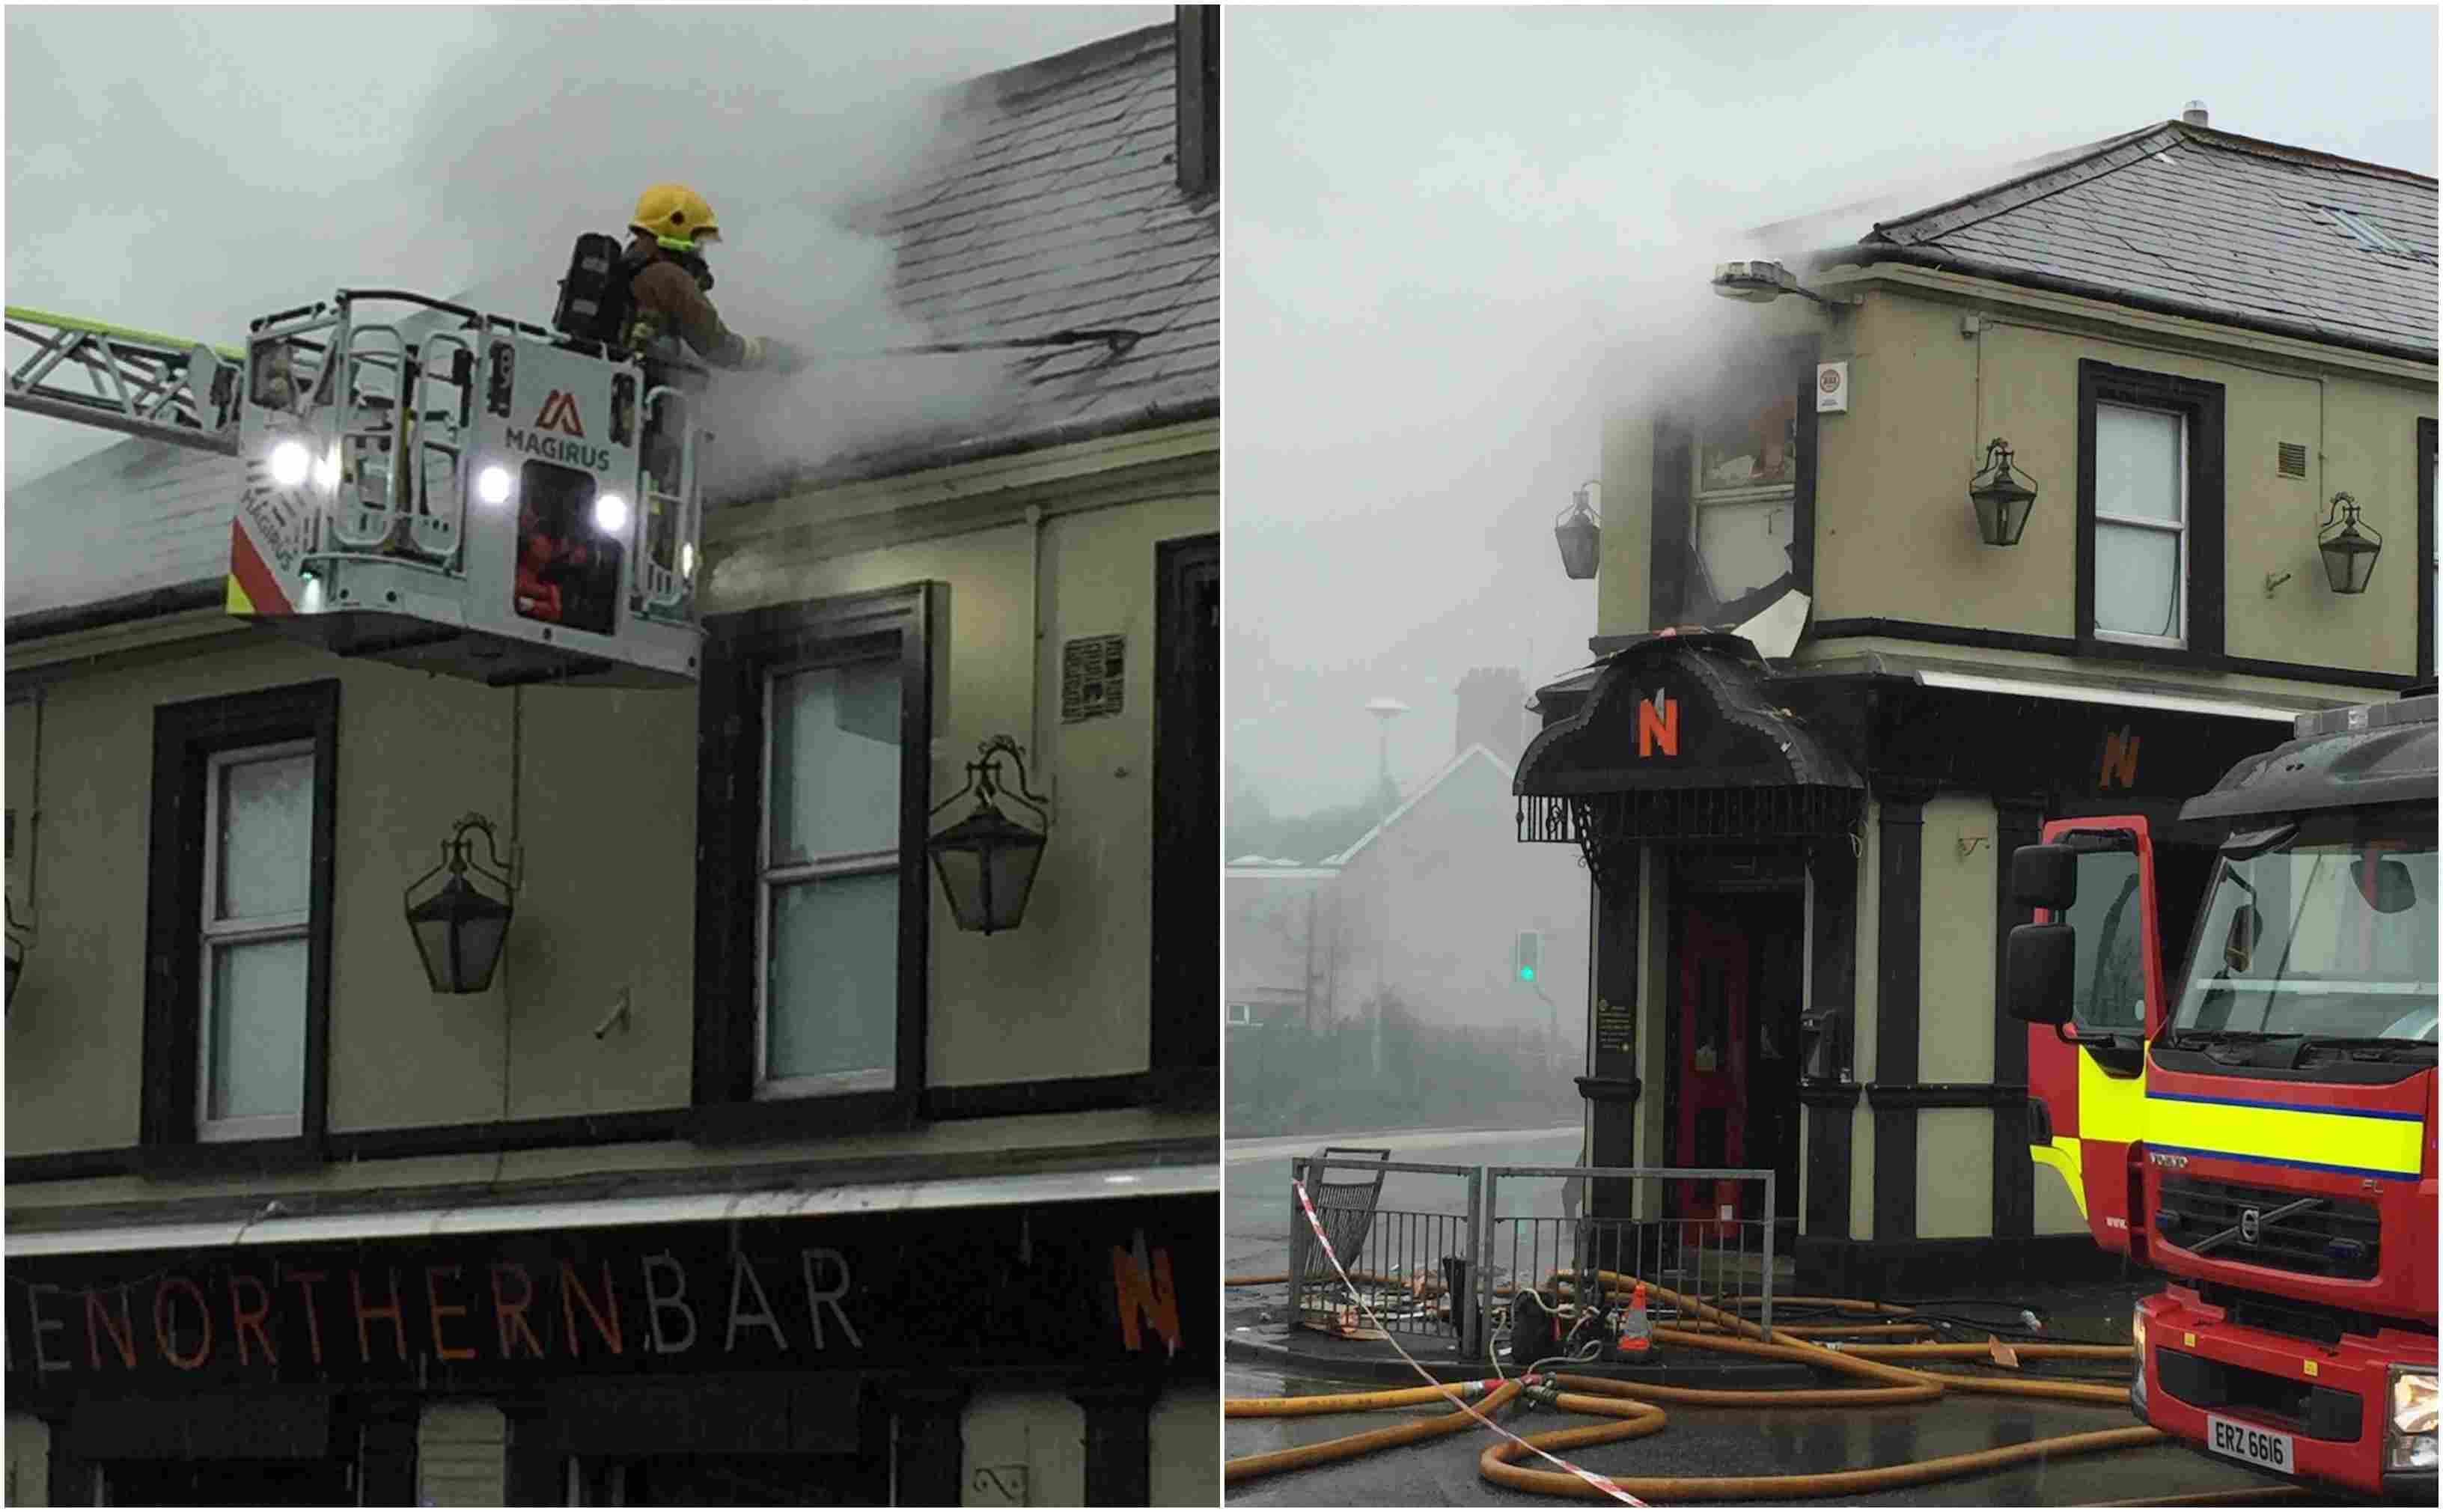 Northern Bar fire in Armagh